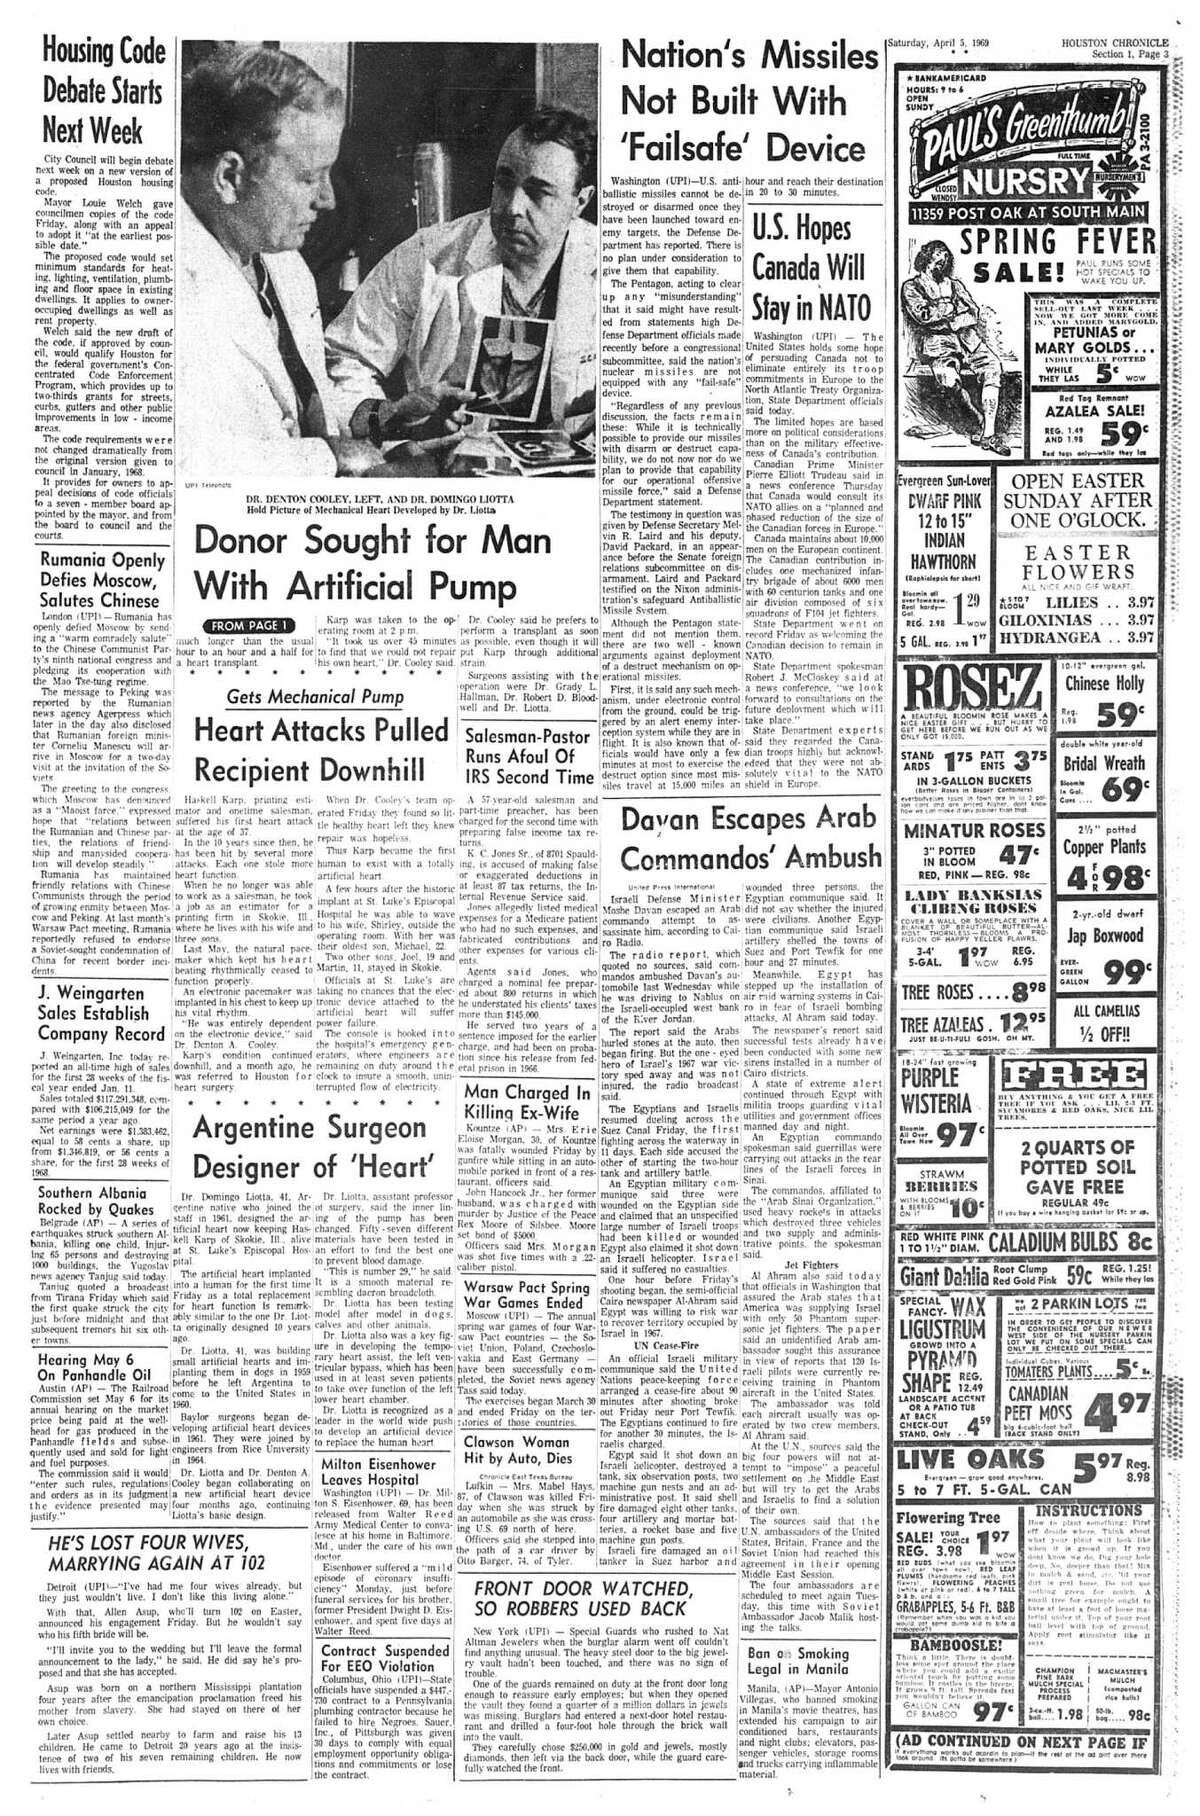 Houston Chronicle inside page (HISTORIC) Â?– April 5, 1969 - section 1, page 4. Donor Sought for Man With Artificial Pump (Haskell Karp)